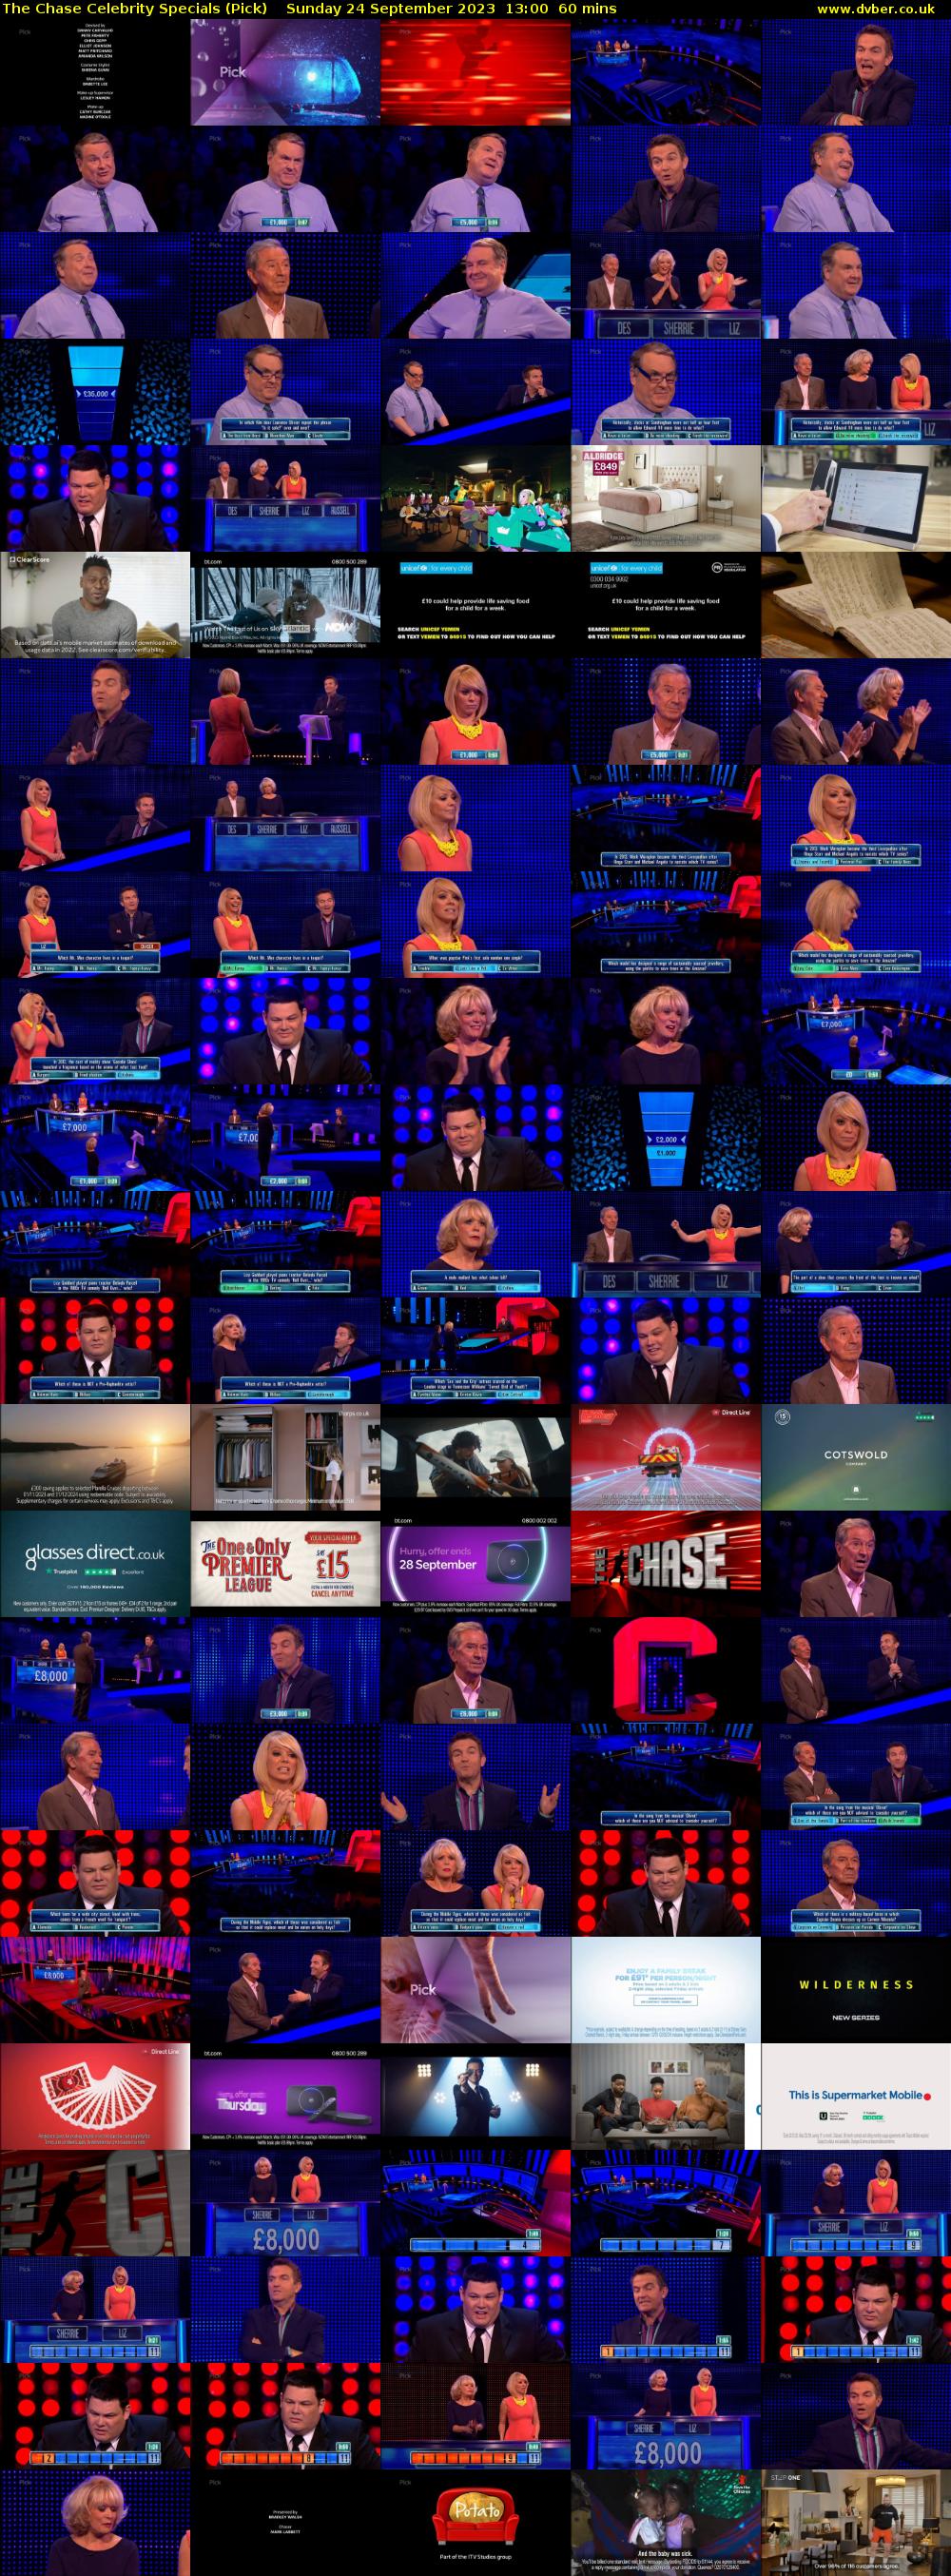 The Chase Celebrity Specials (Pick) Sunday 24 September 2023 13:00 - 14:00